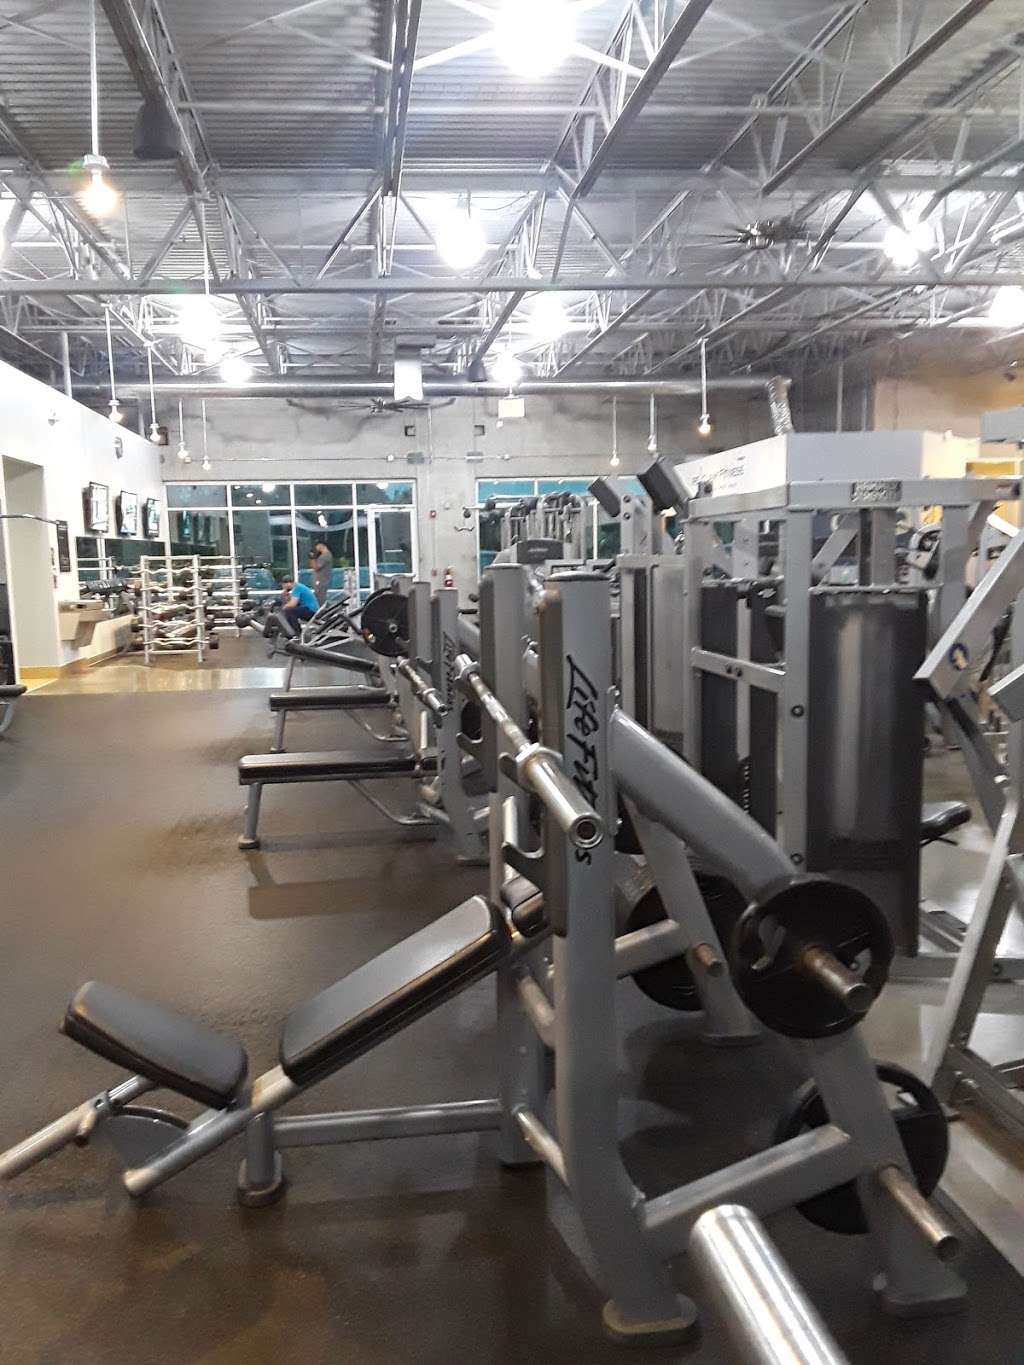 Re|Claim Fitness | 1325 Lincoln Hwy, New Lenox, IL 60451 | Phone: (815) 463-8500